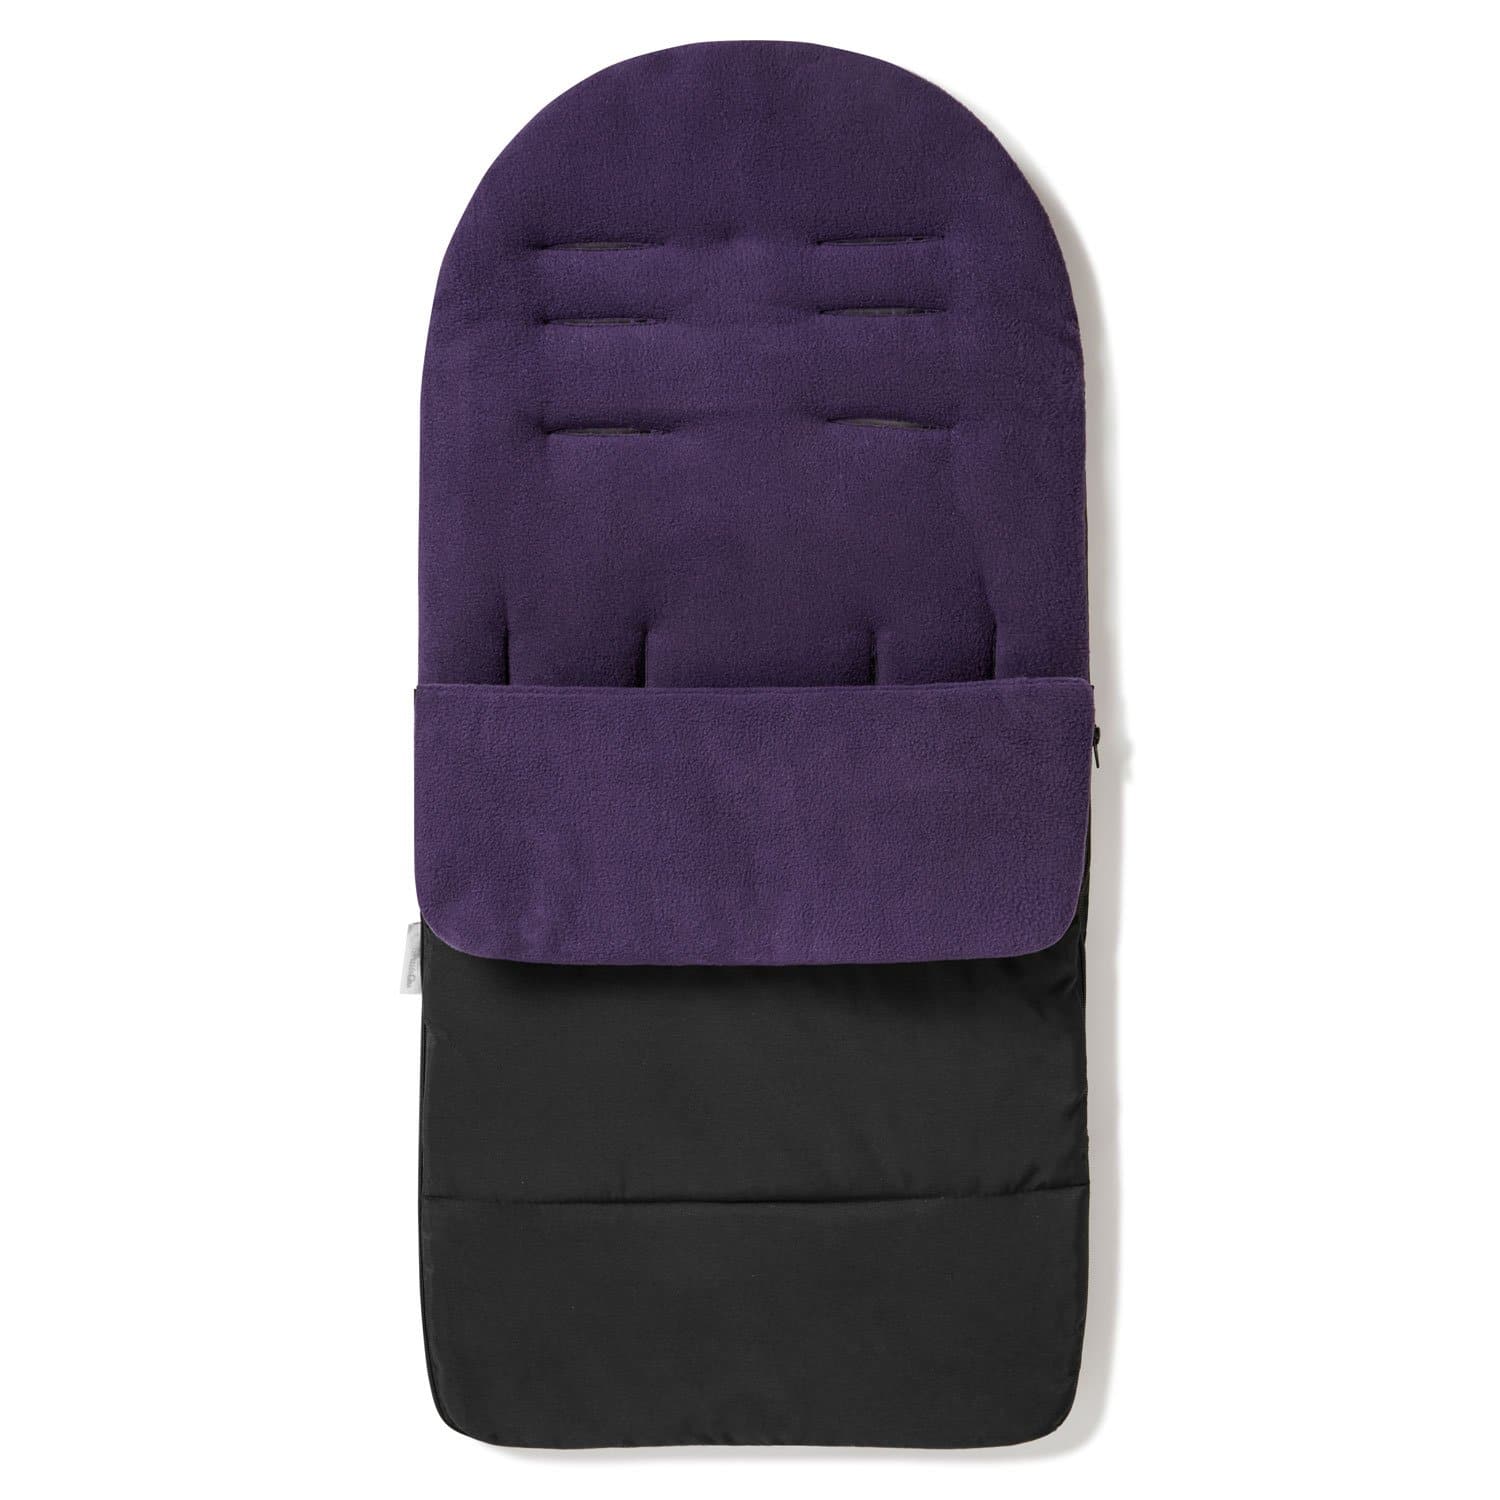 Premium Footmuff / Cosy Toes Compatible with Bebe 9 - Plum Purple / Fits All models | For Your Little One